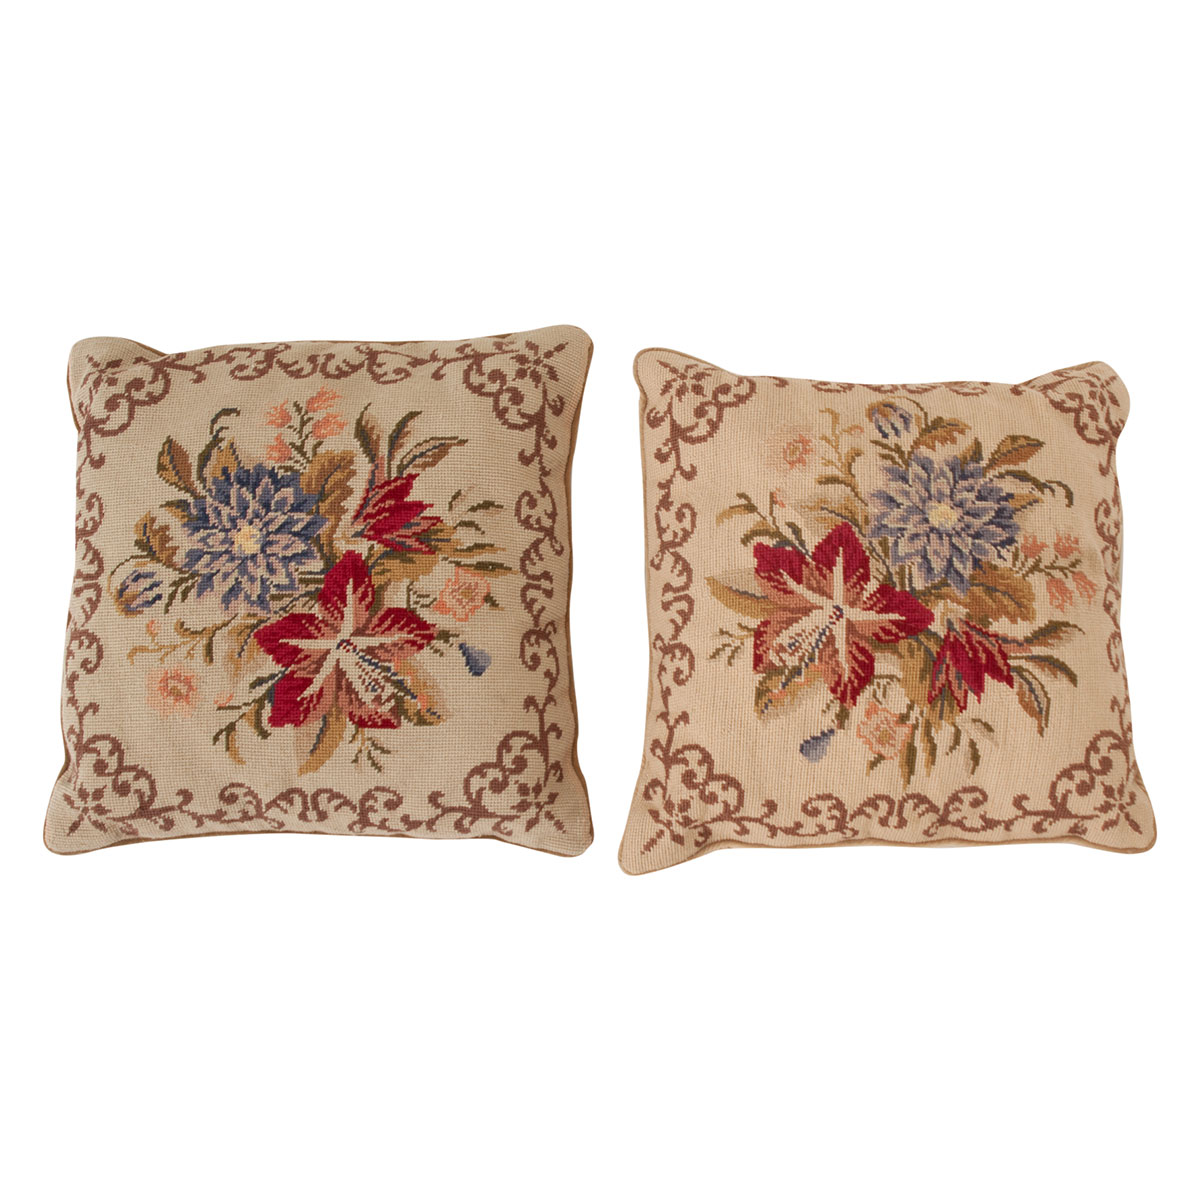 Pair of Vintage Square Needlepoint Pillows - Fireside Antiques